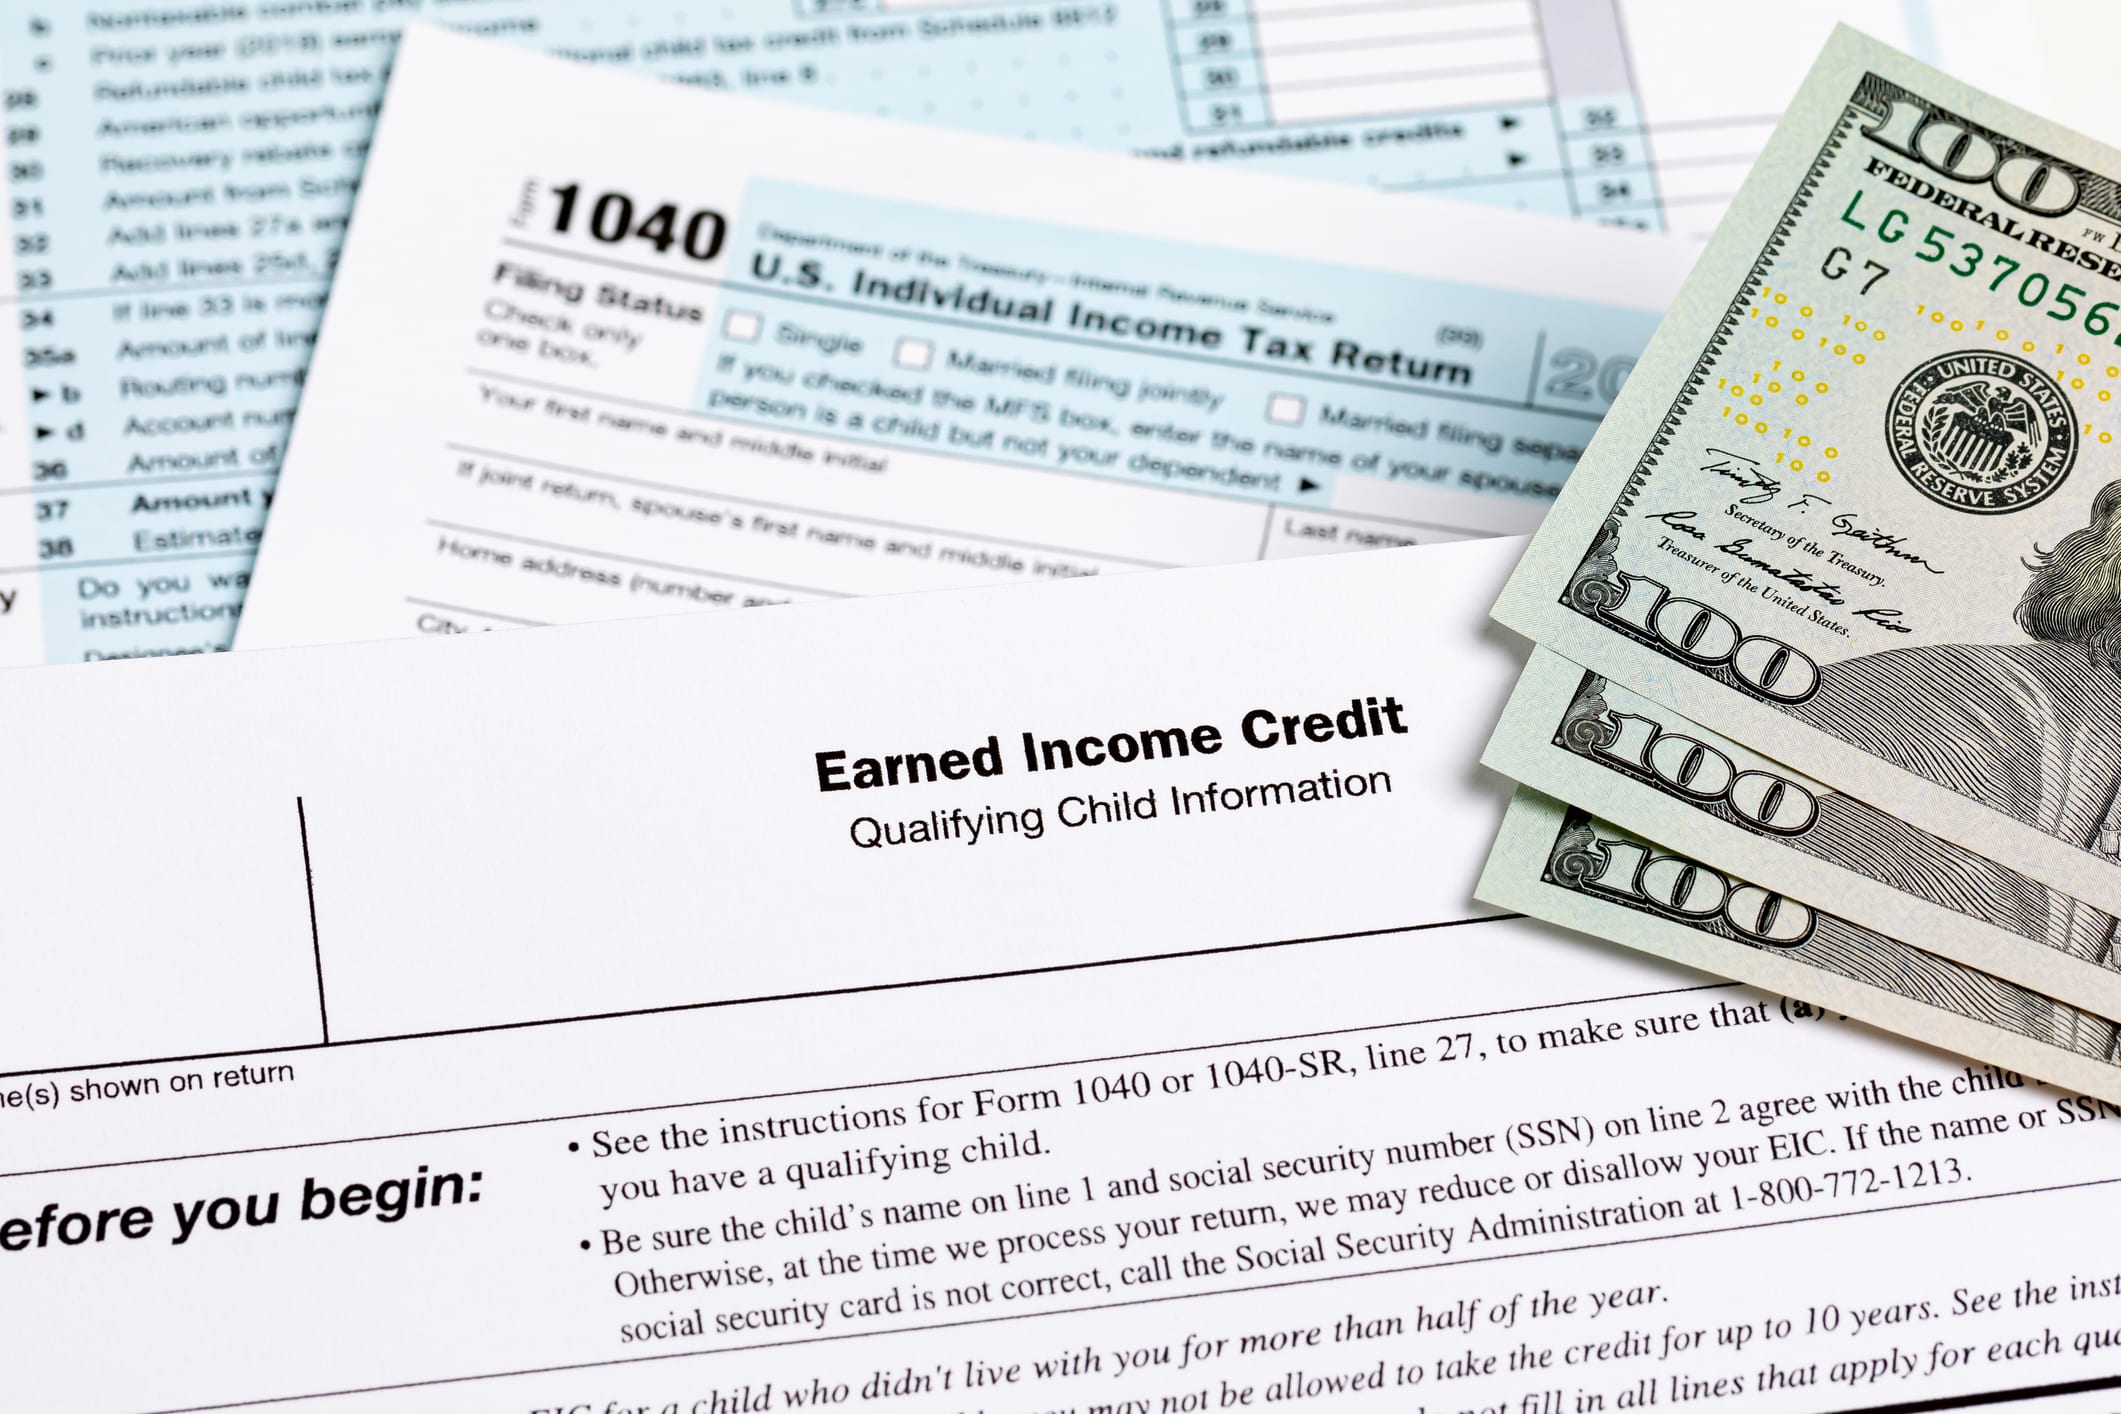 Earned income tax credit document, money